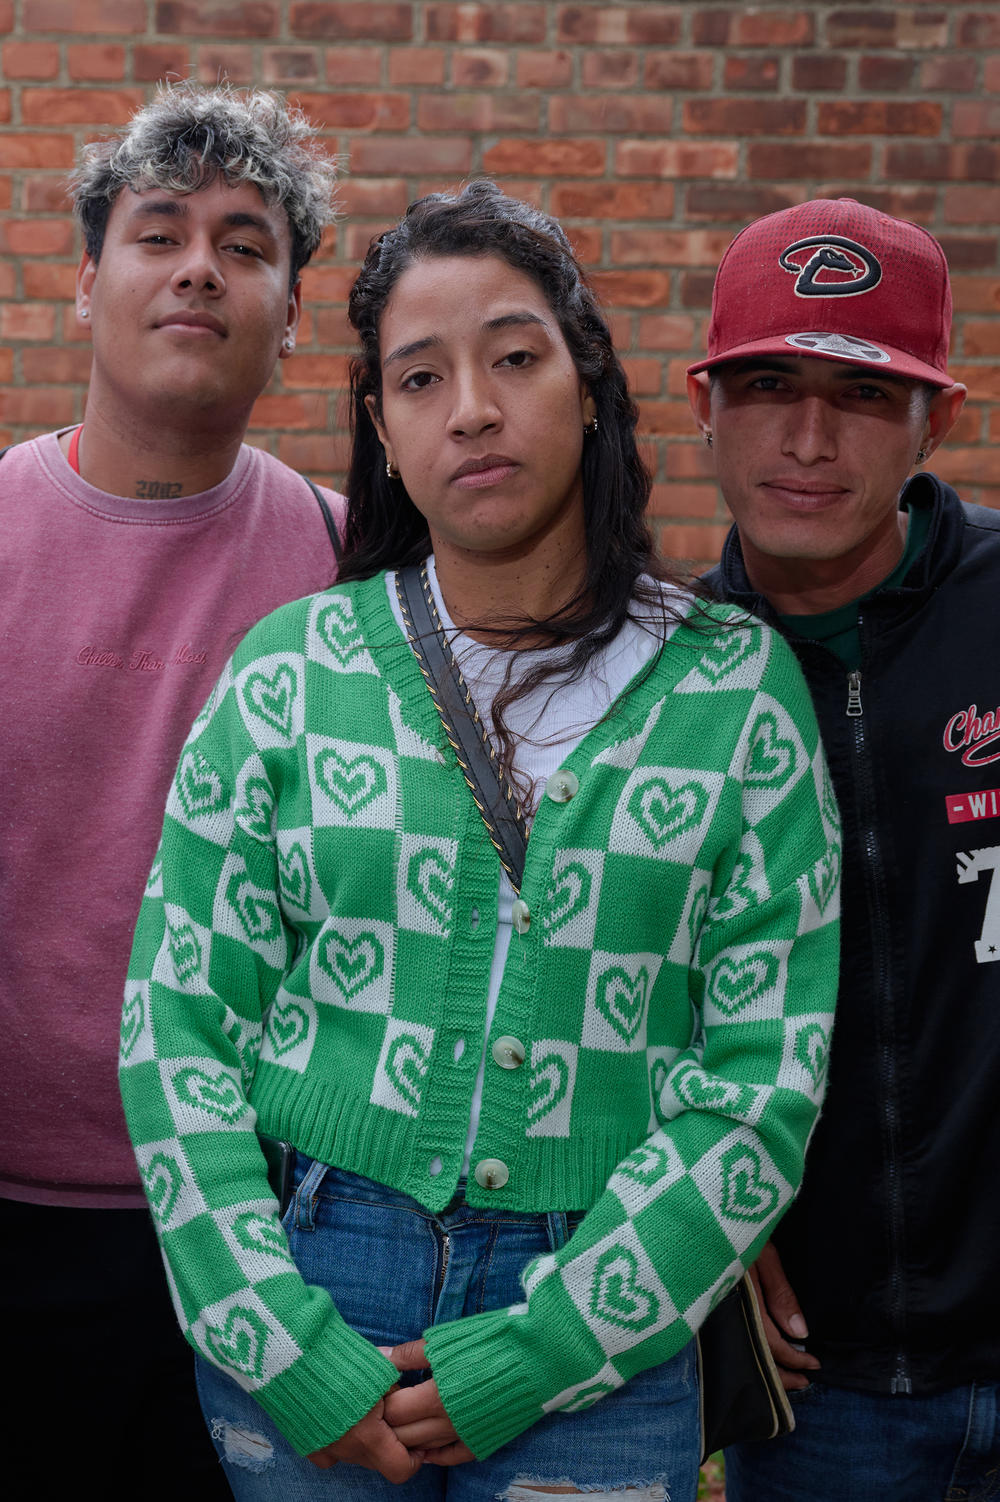 Darlín, Carlos, and Jose became friends when they were bused to Albany, N.Y. They say they just want to be settled and to work, hoping to open a restaurant in town someday.